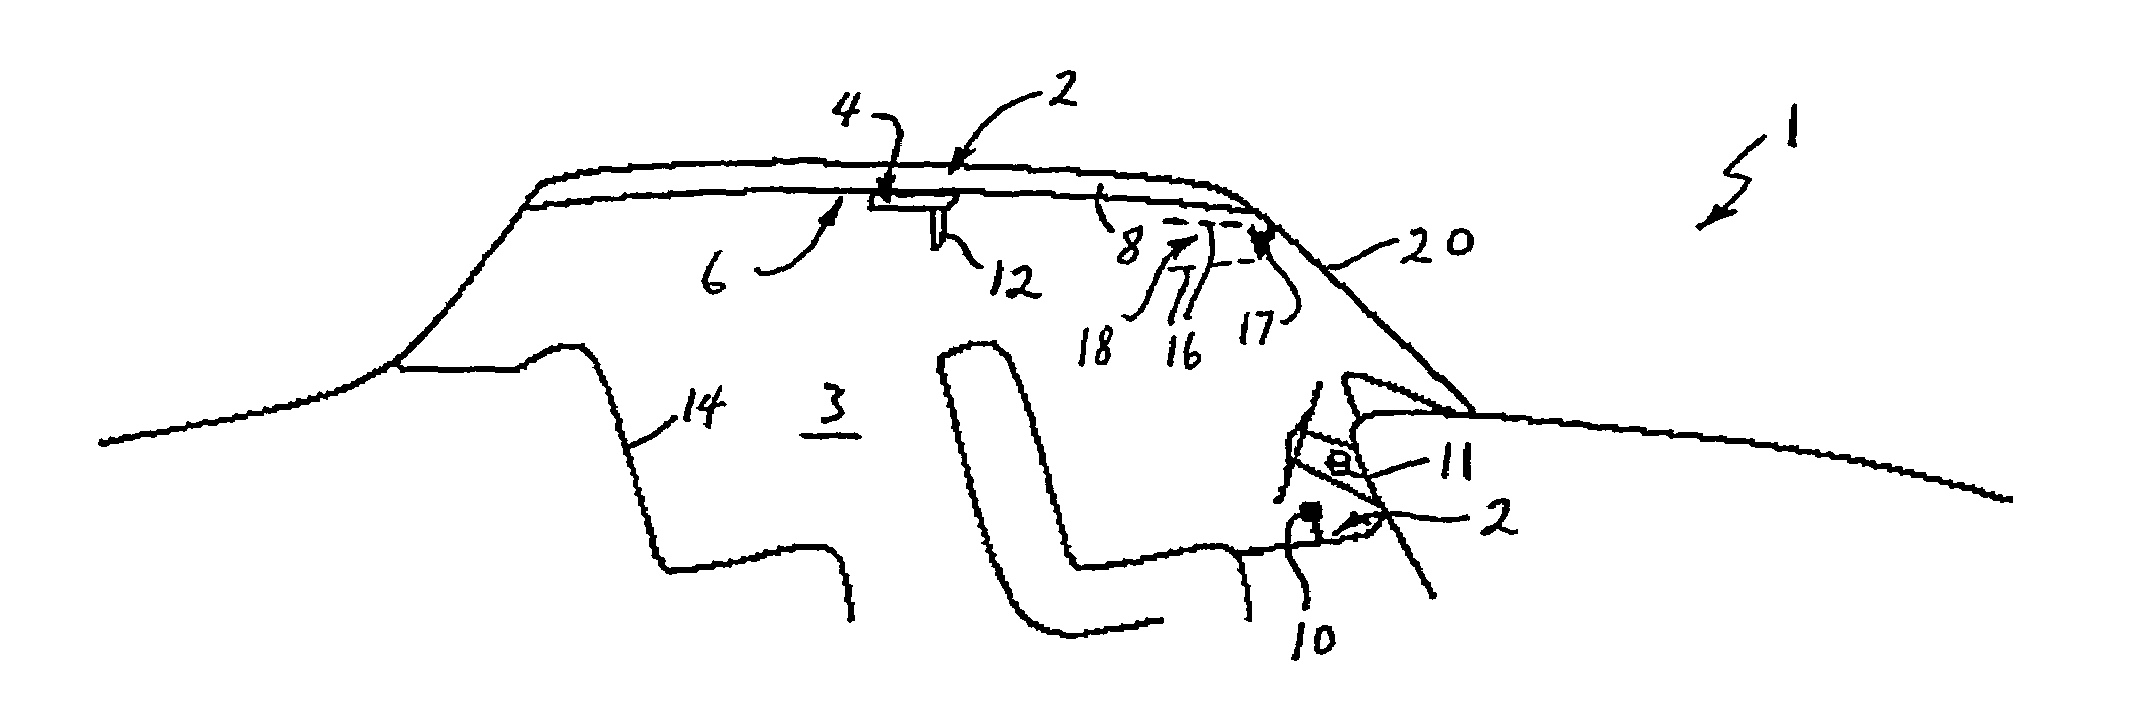 In-vehicle multimedia system